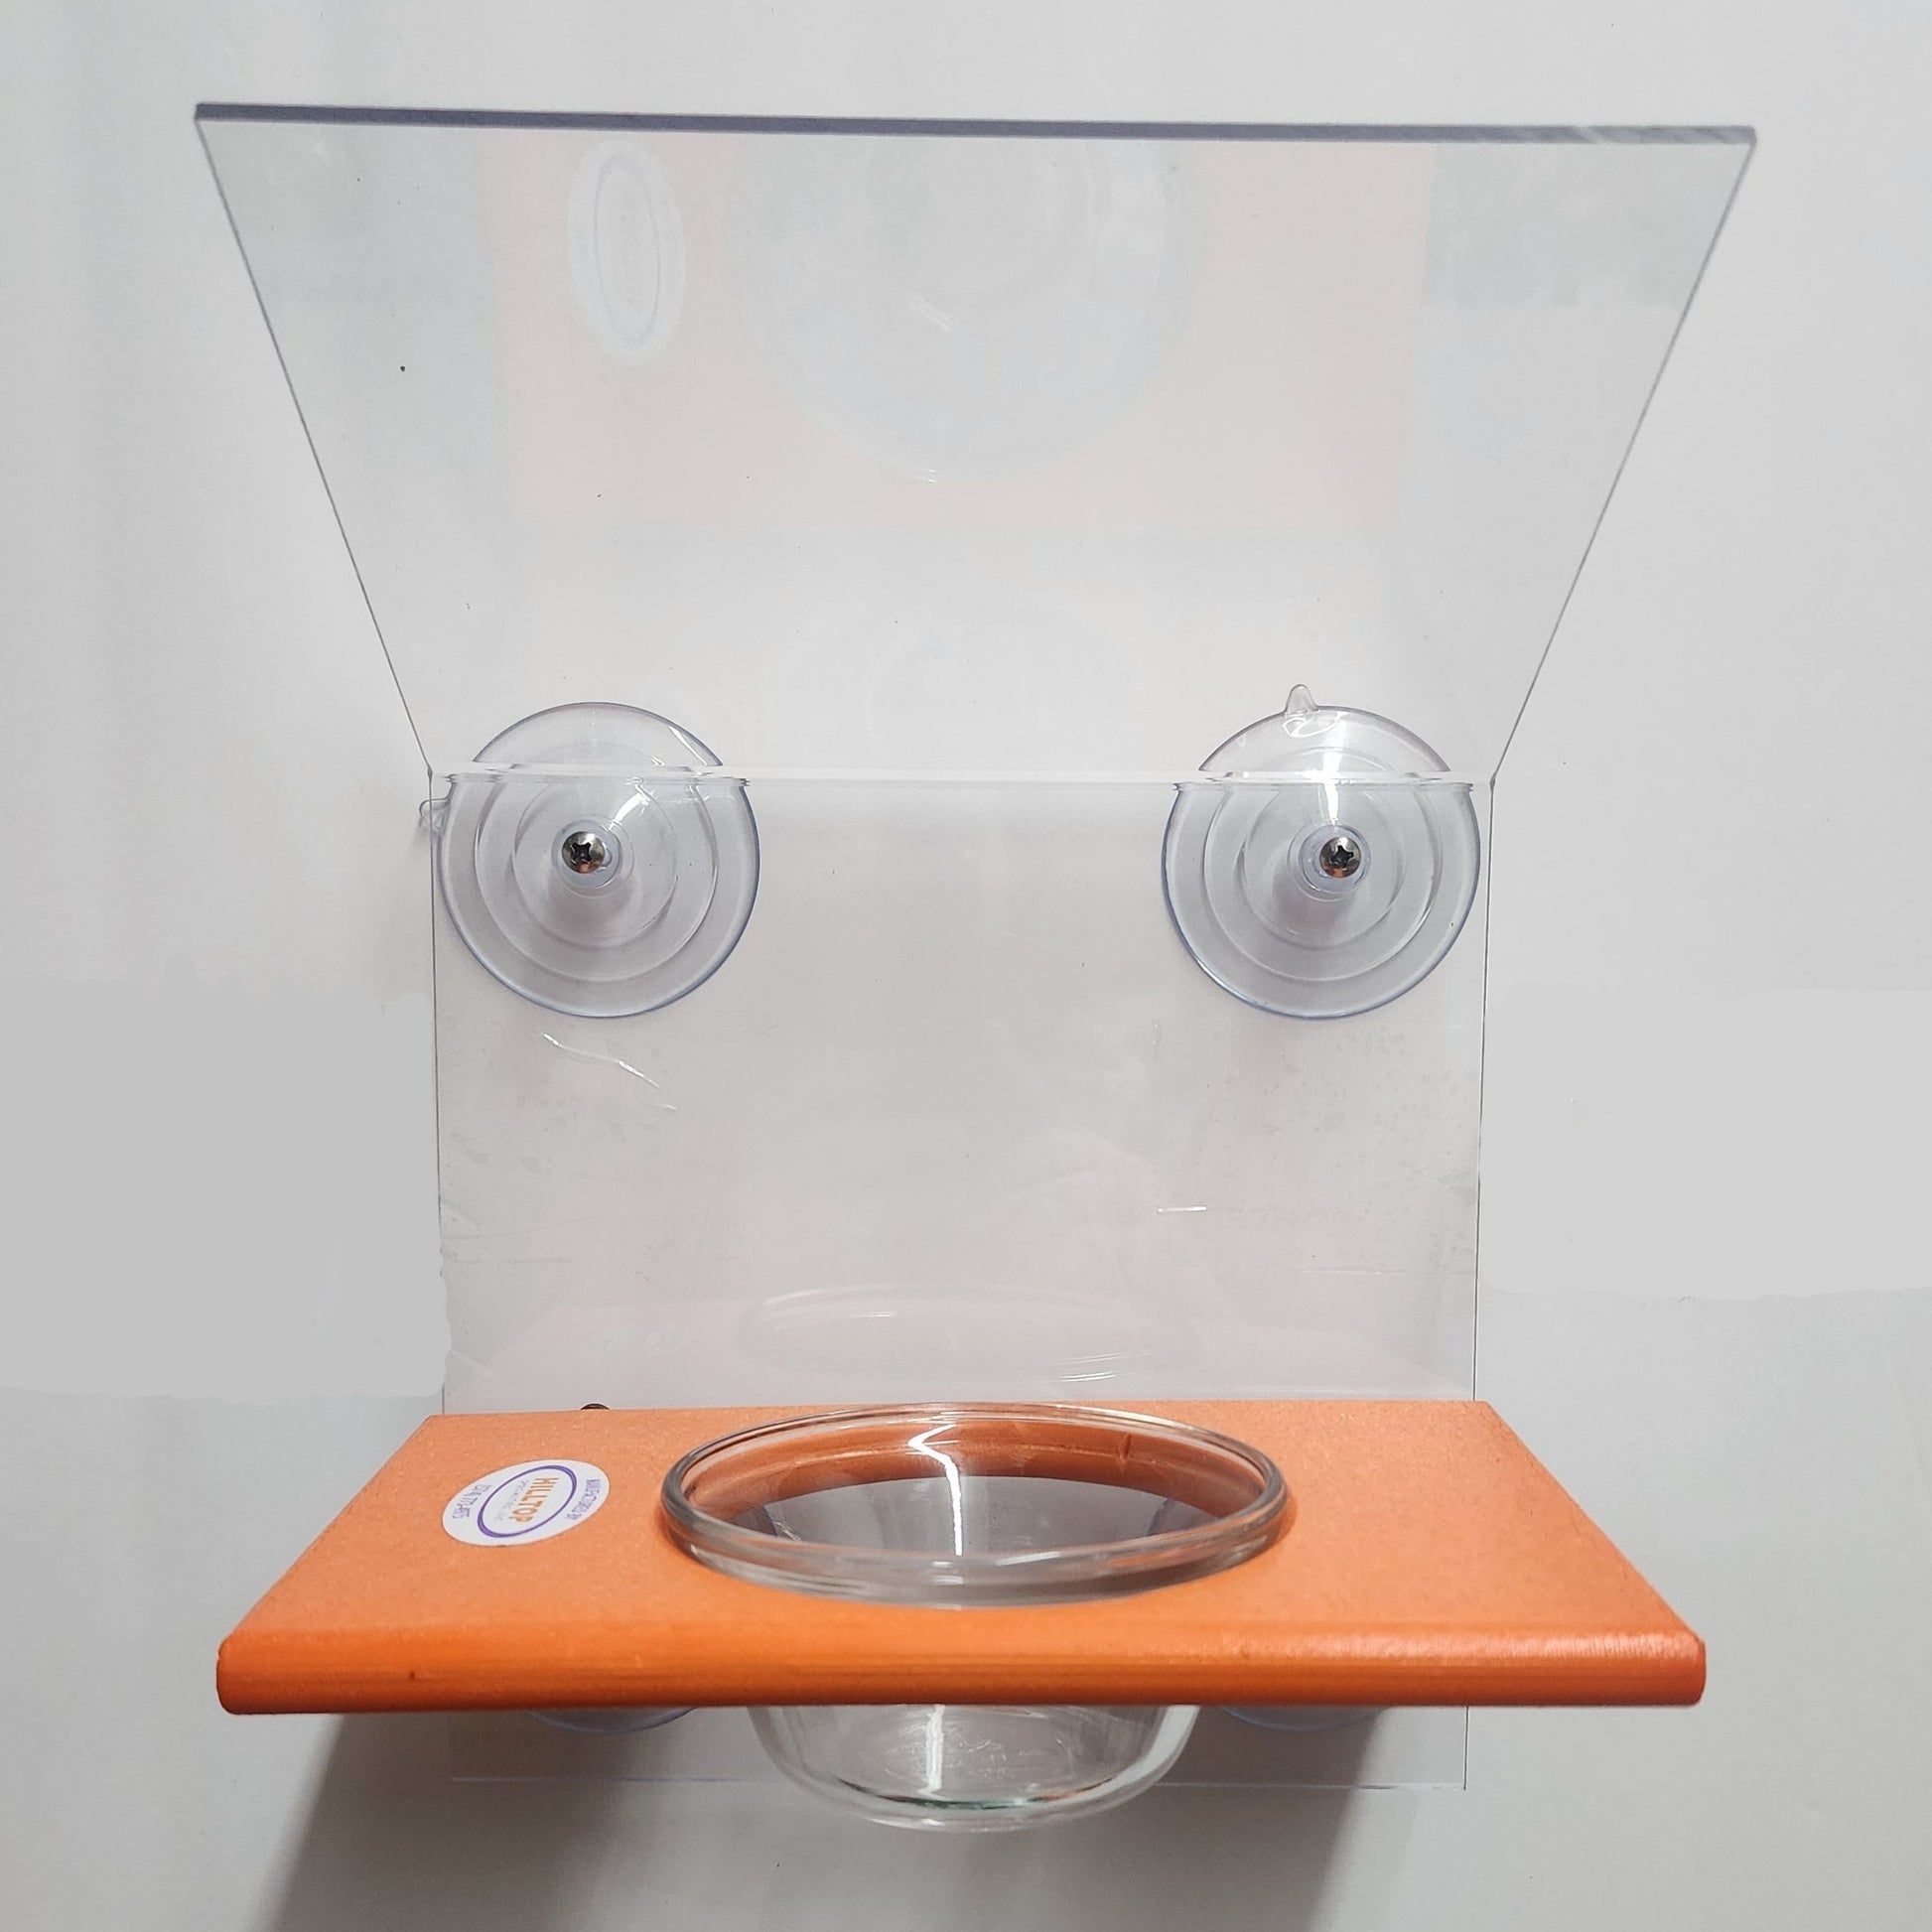 clear top, back and bowl with orange base